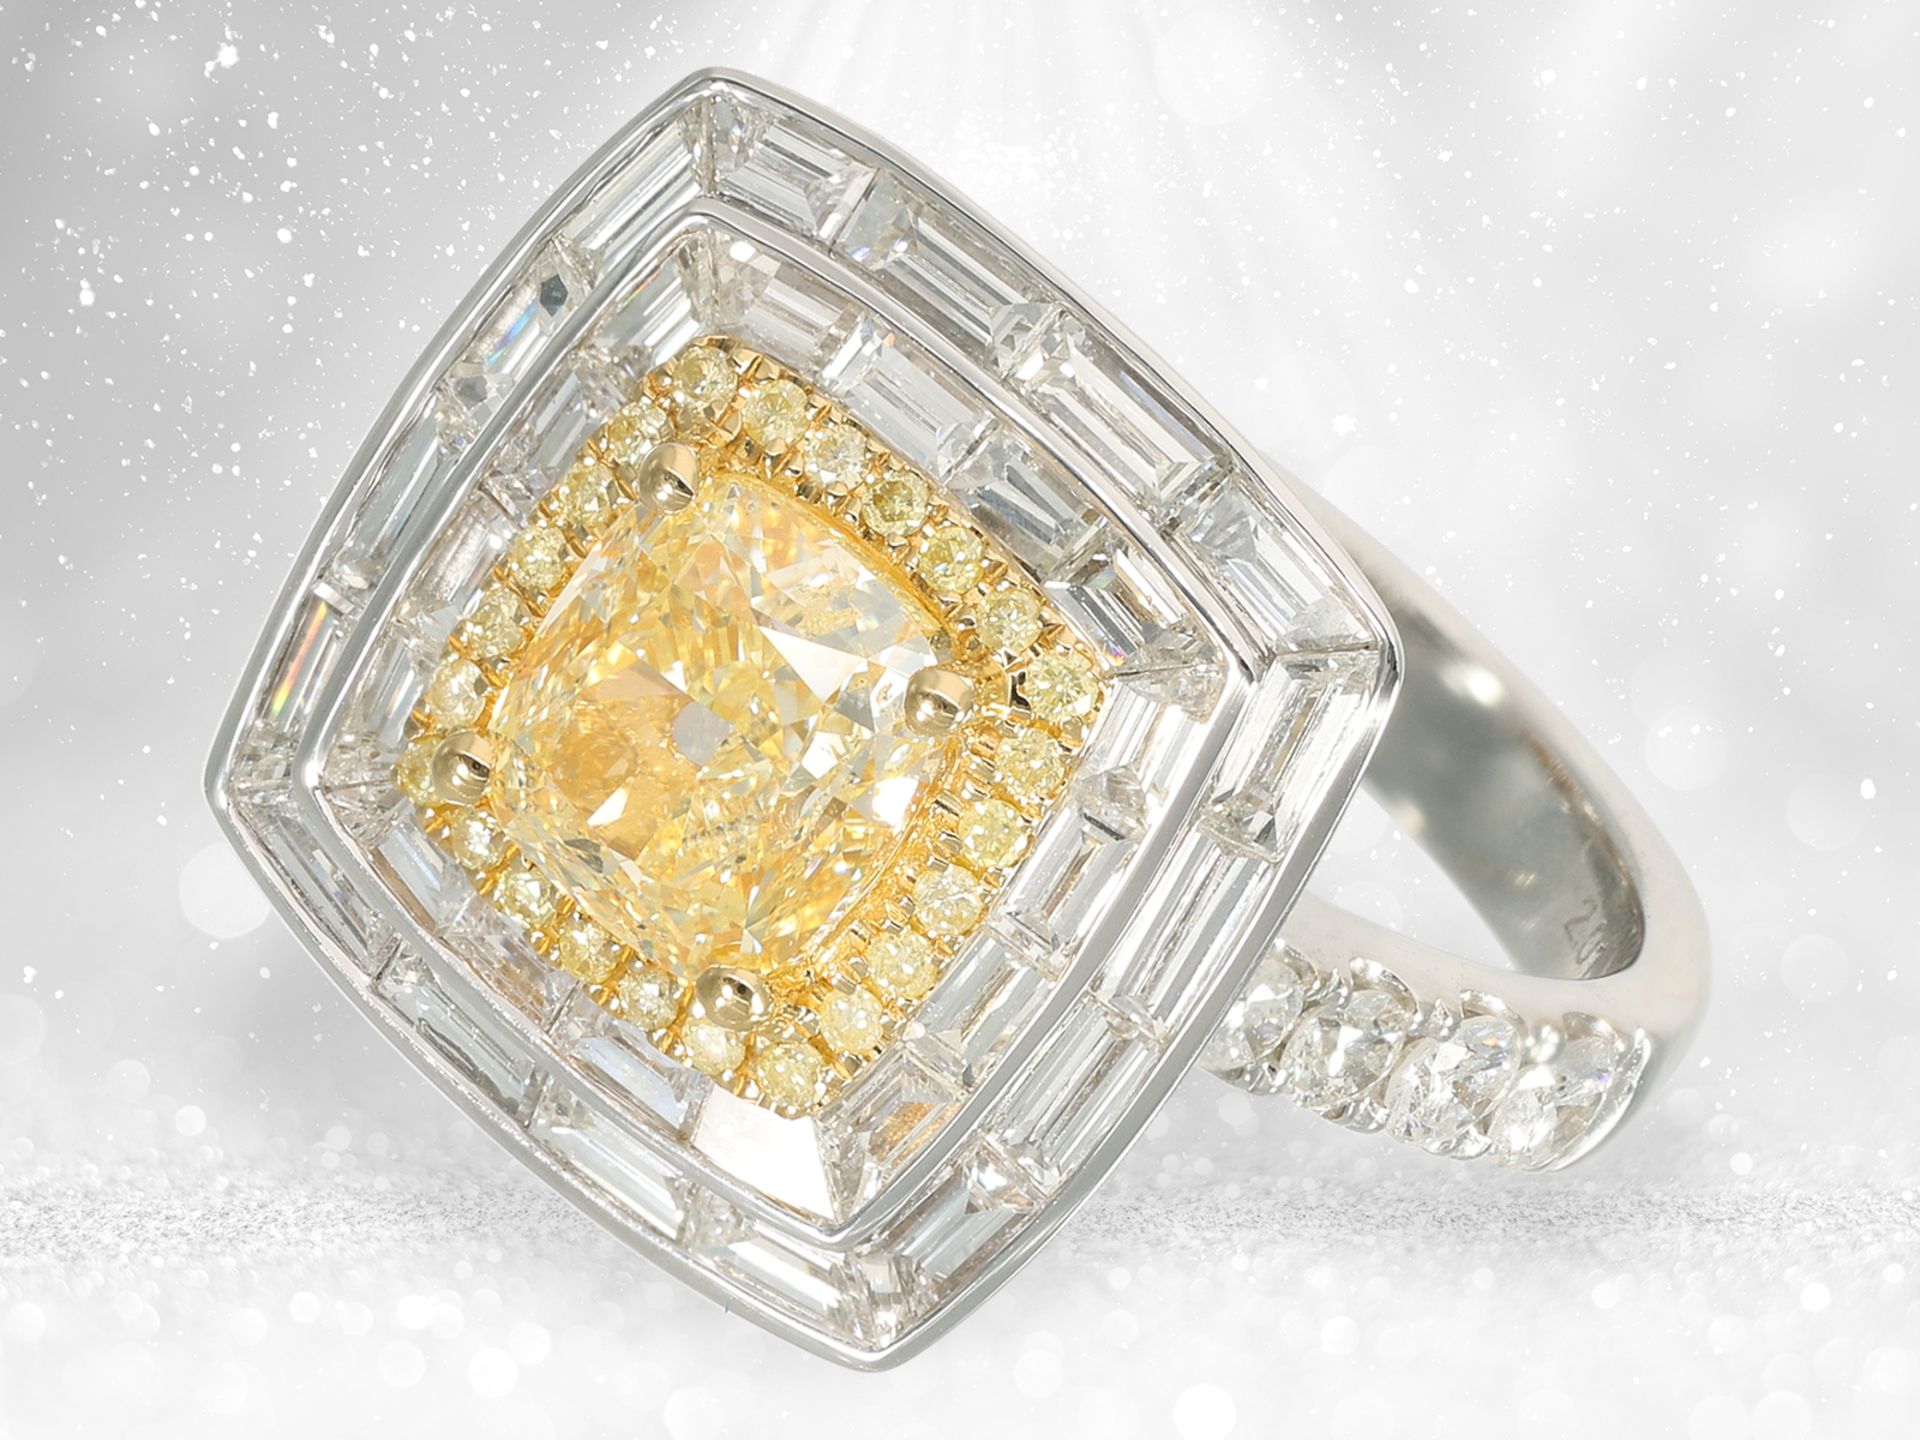 Ring: extremely elaborately crafted diamond ring, centre stone "Yellow Cushion" of 2ct - Image 4 of 5